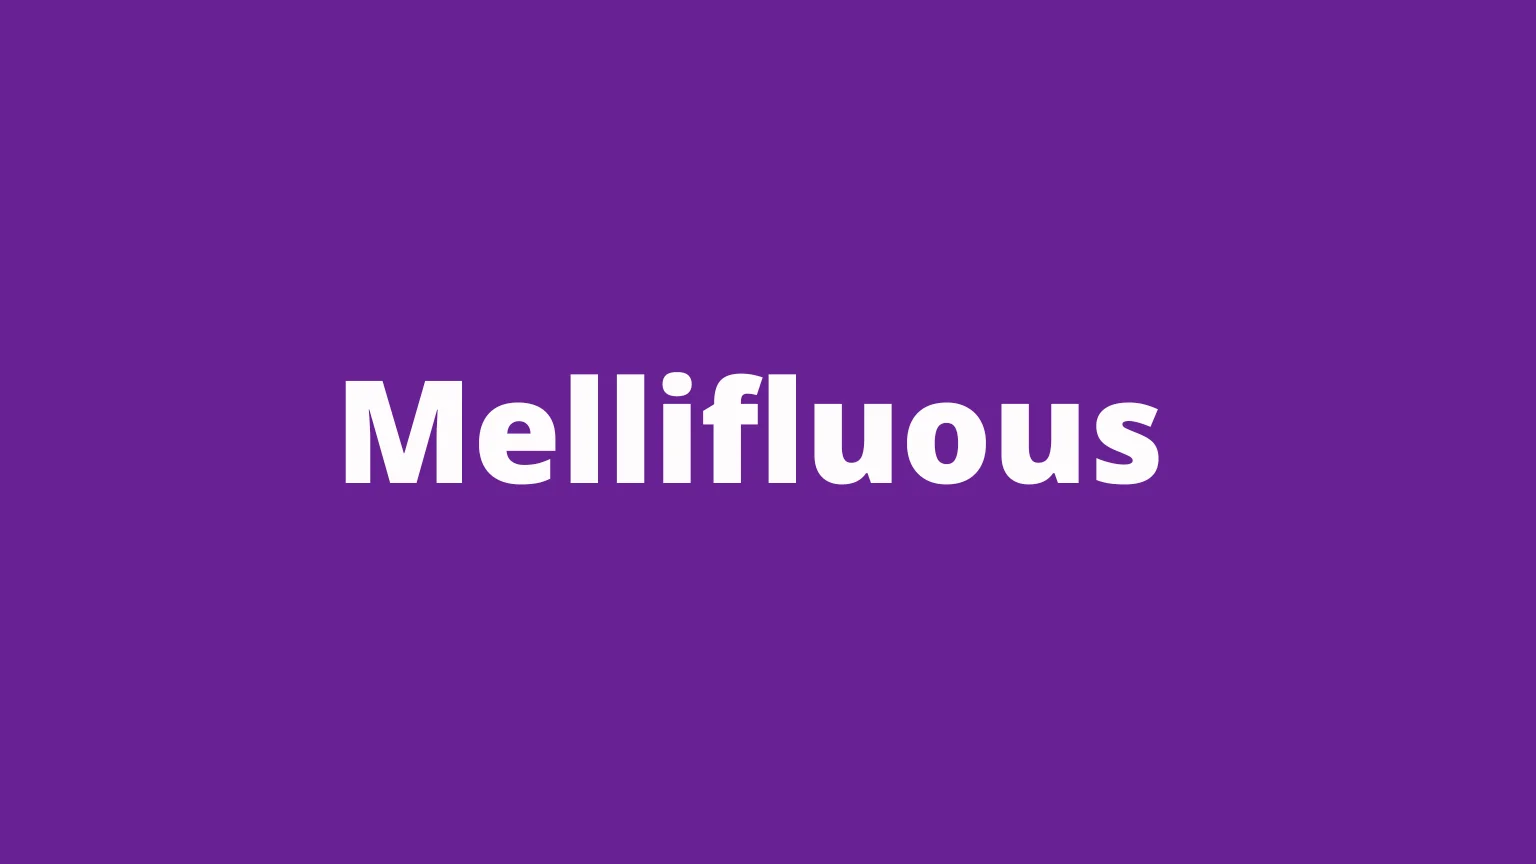 The word mellifluous and its meaning